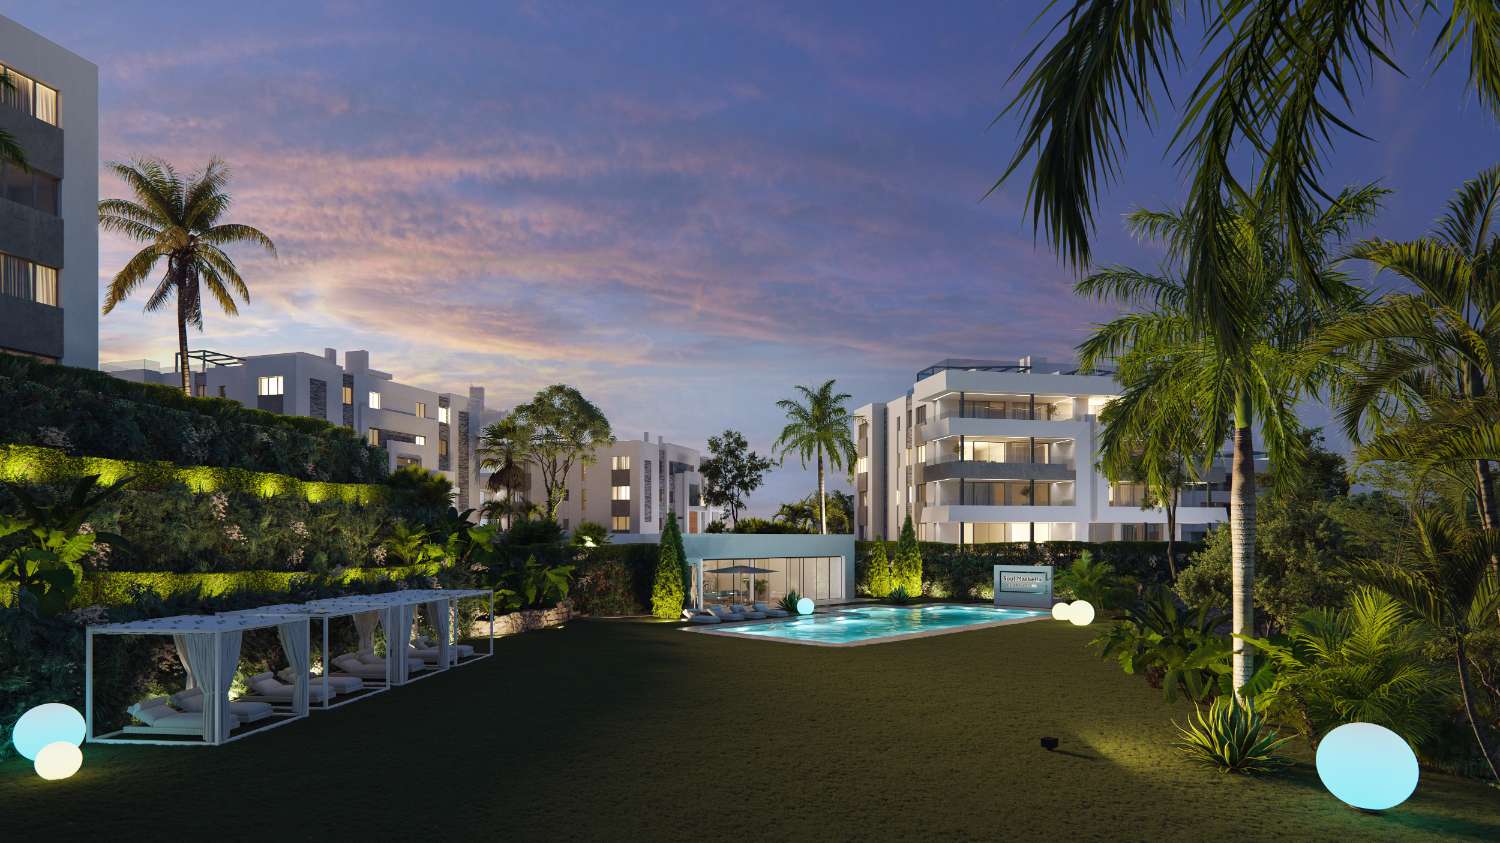 Luxurious apartment in Marbella, ground floor with private garden in urbanization on the first line of The Golf Course